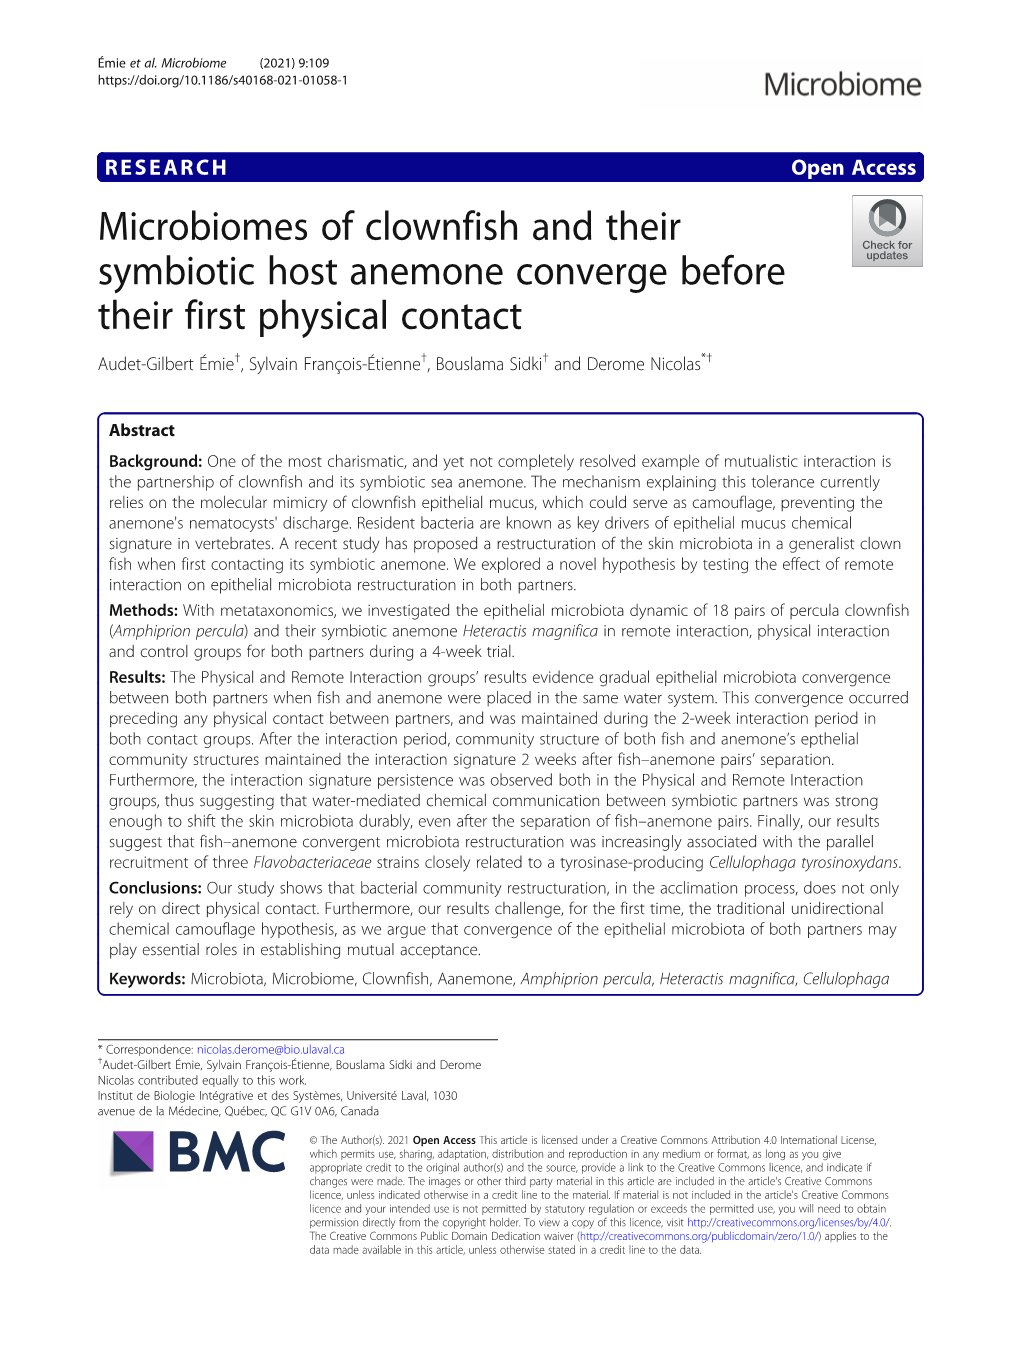 Microbiomes of Clownfish and Their Symbiotic Host Anemone Converge